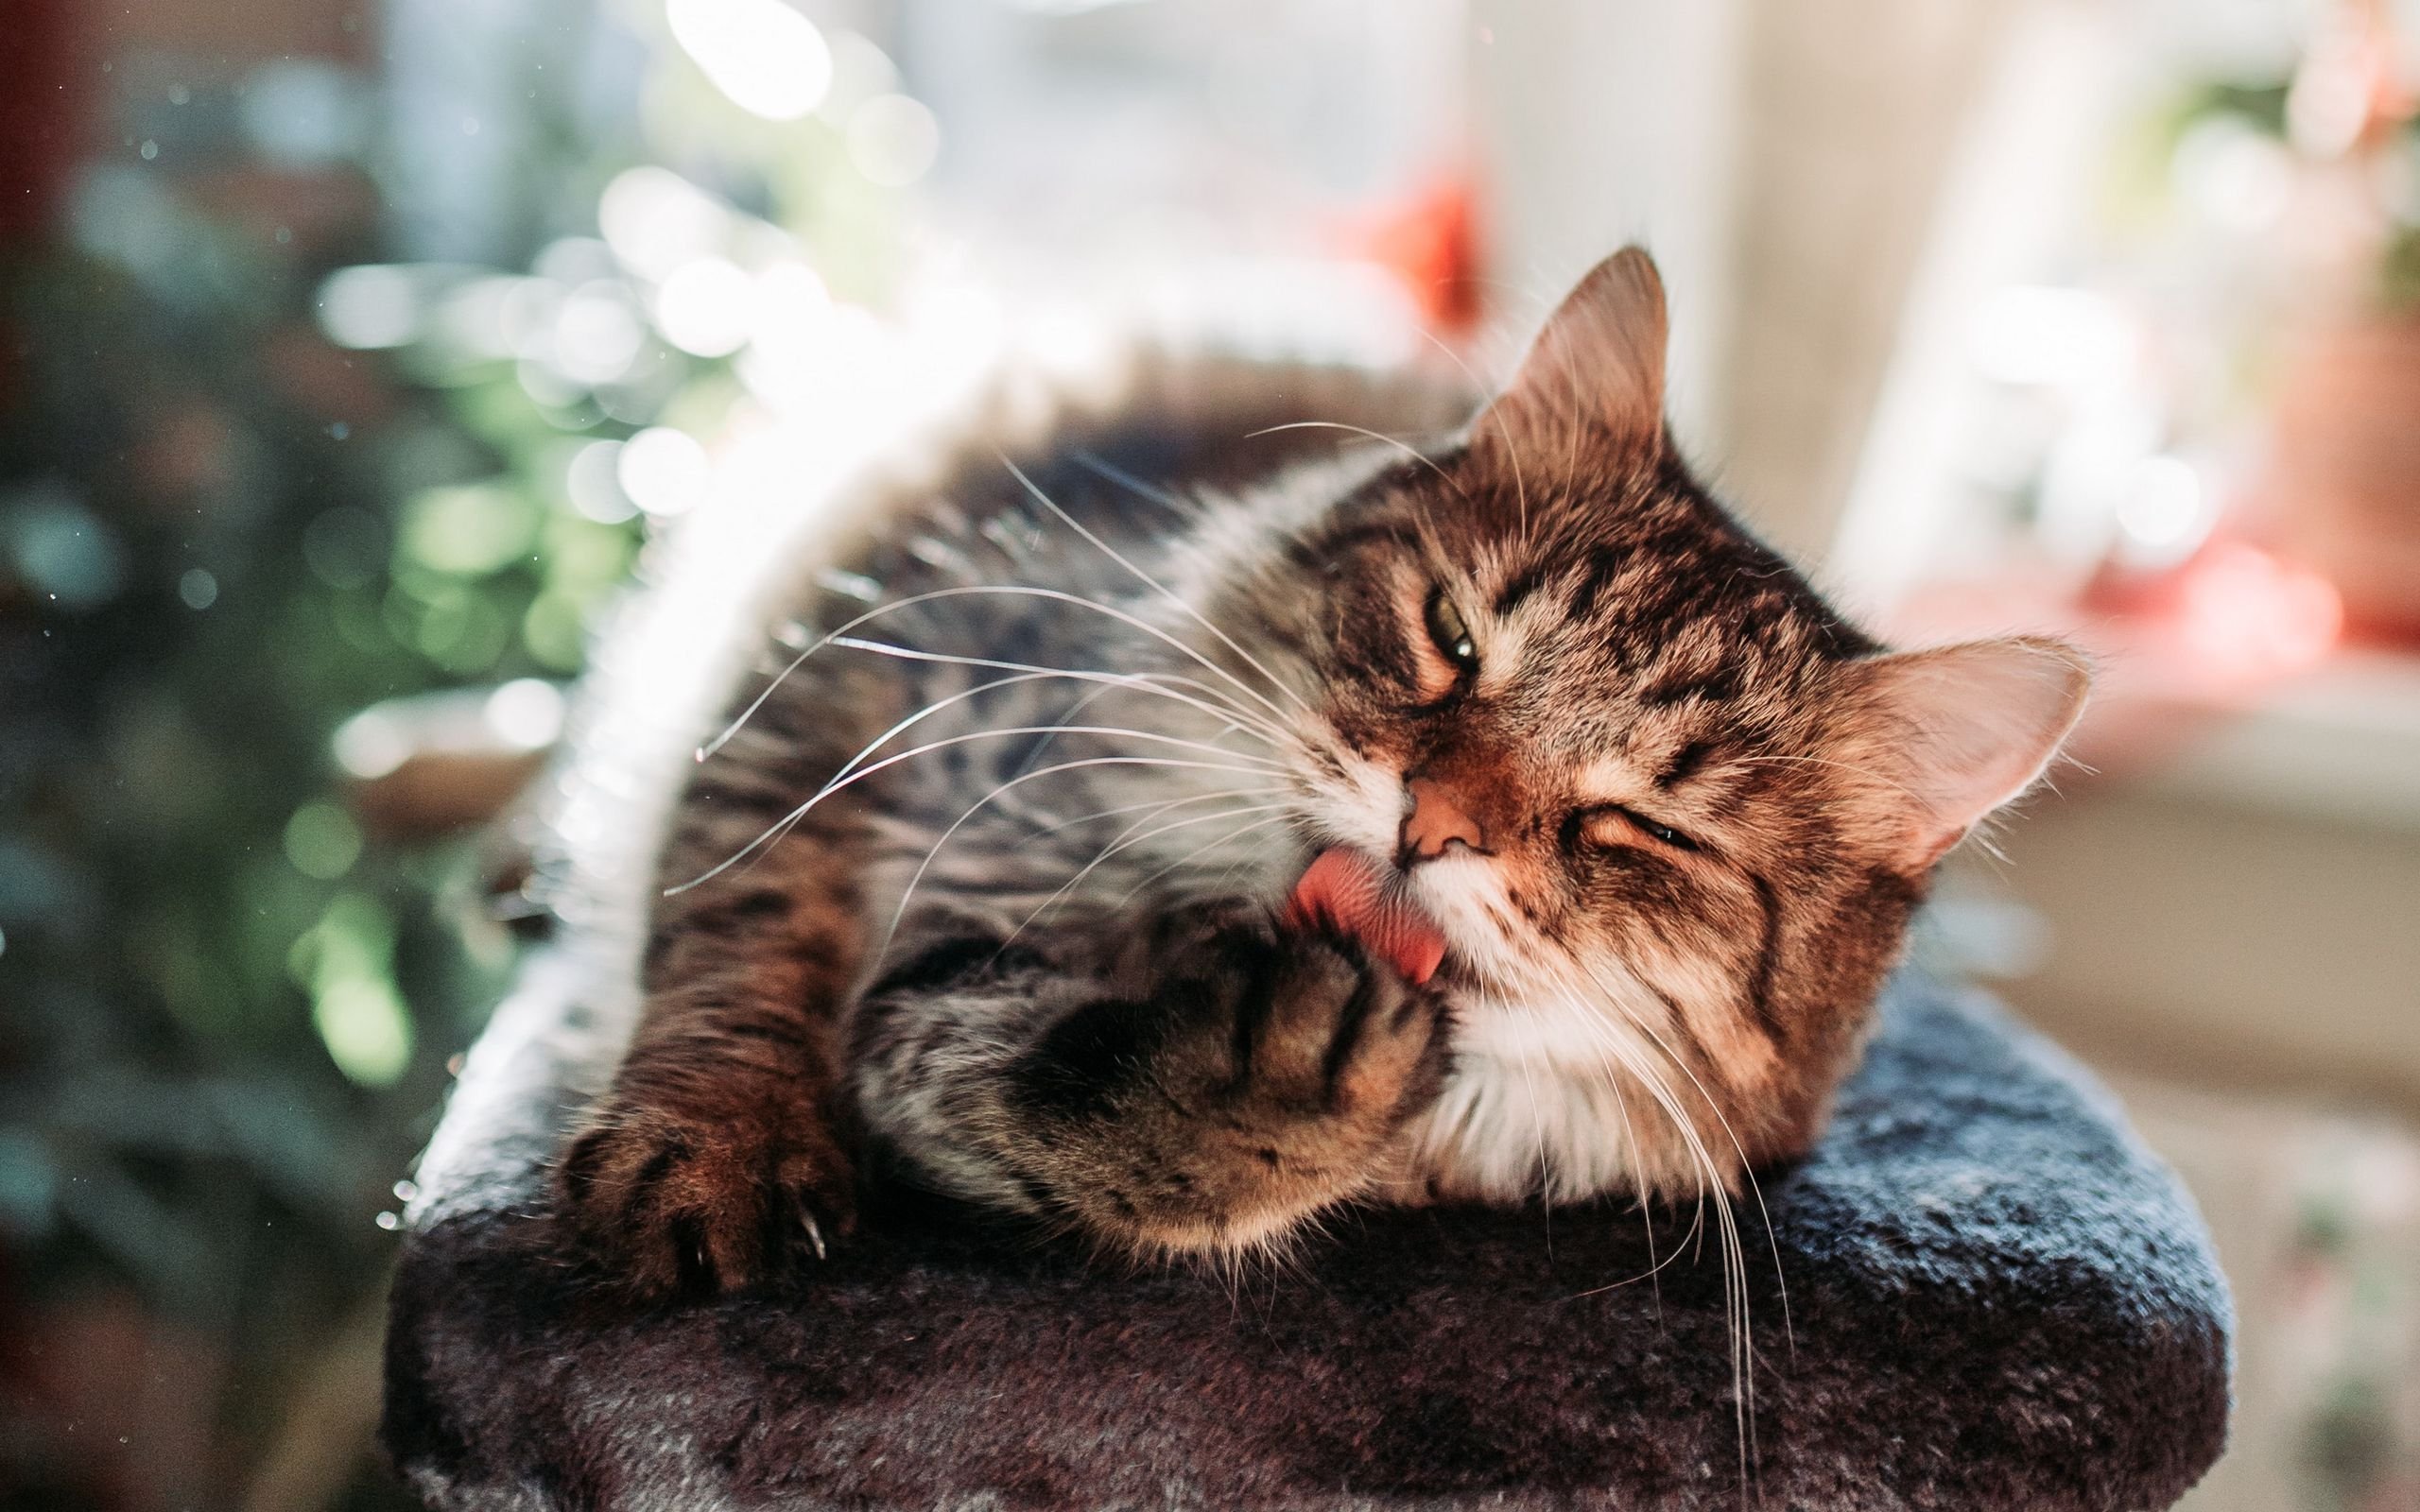 Myth 1: Cats are able to get rid of diseases on their own by licking wounds